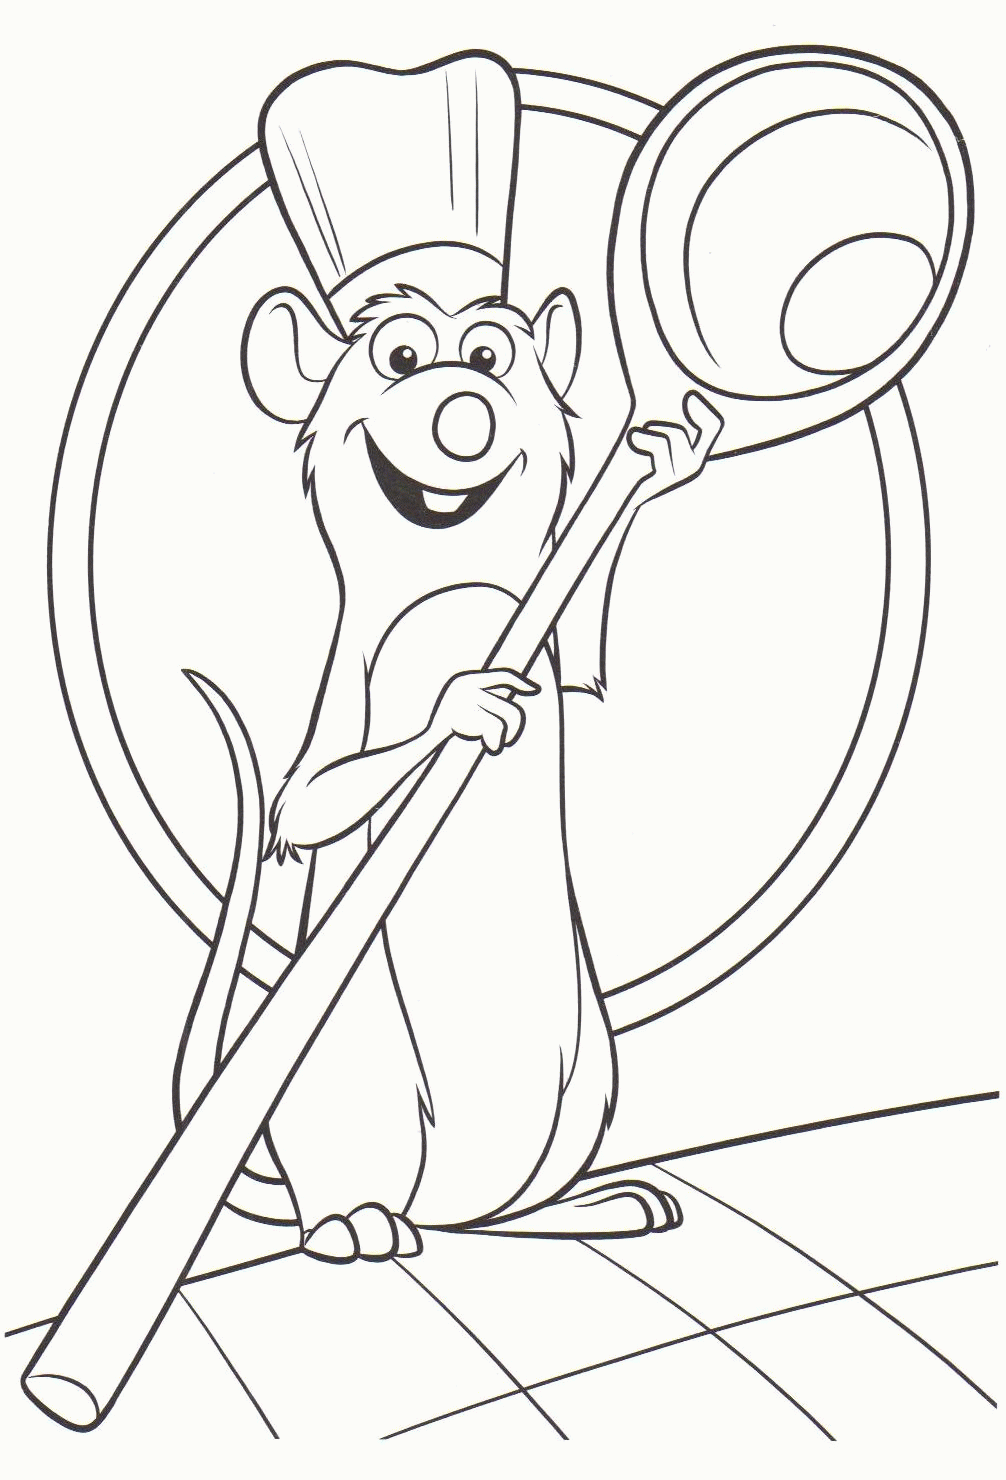 Free coloring pages of Remy from the Disney/Pixar movie RATATOUILLE